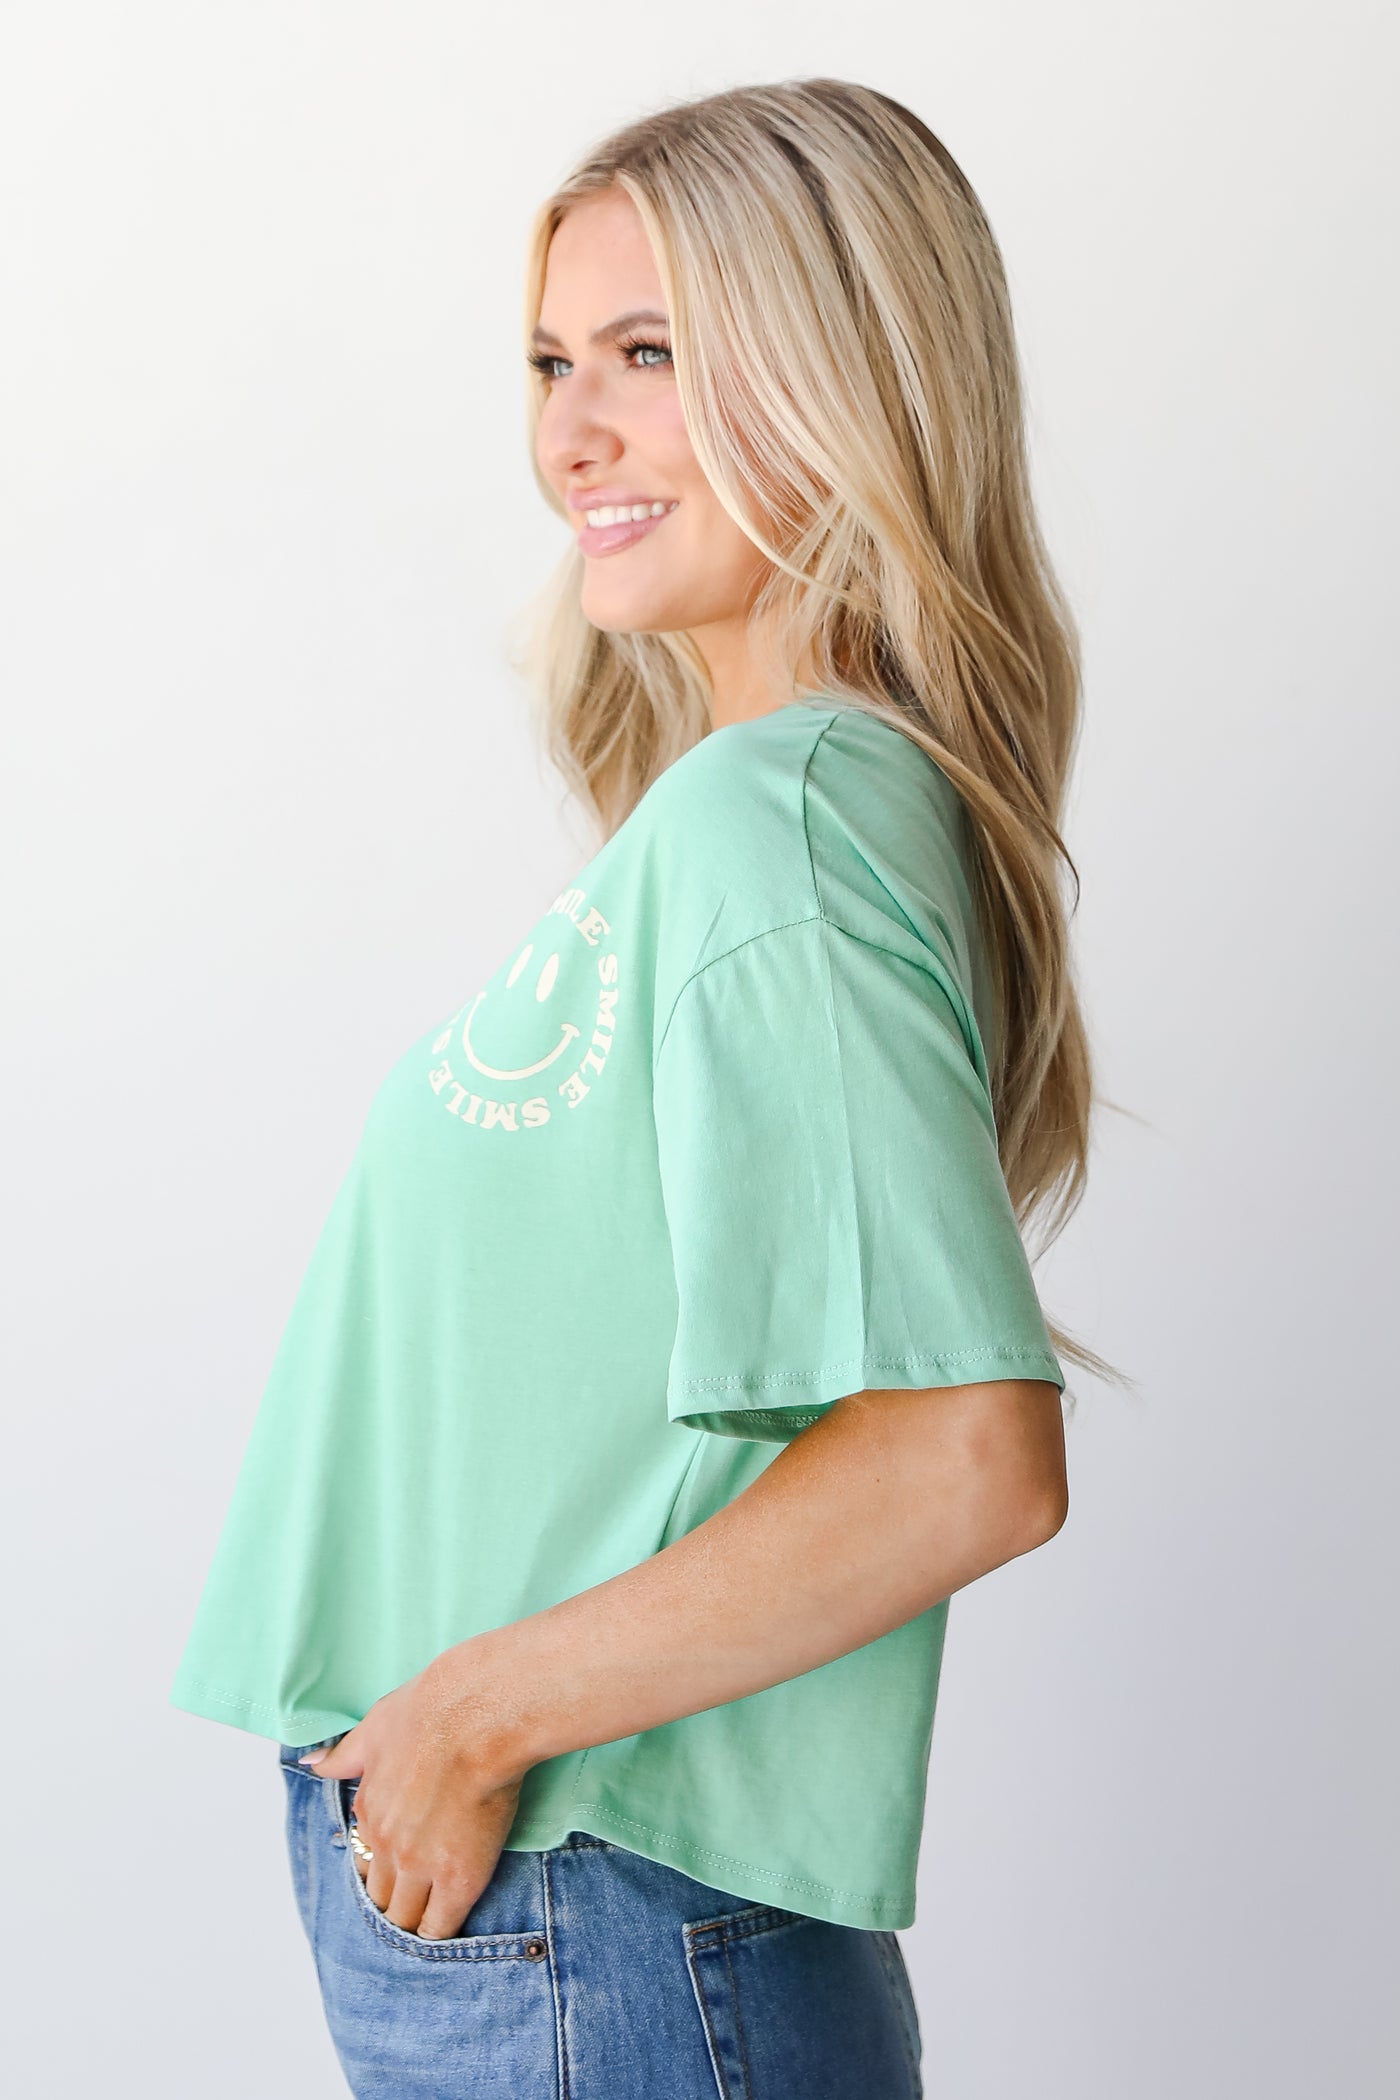 Smile Cropped Graphic Tee side view